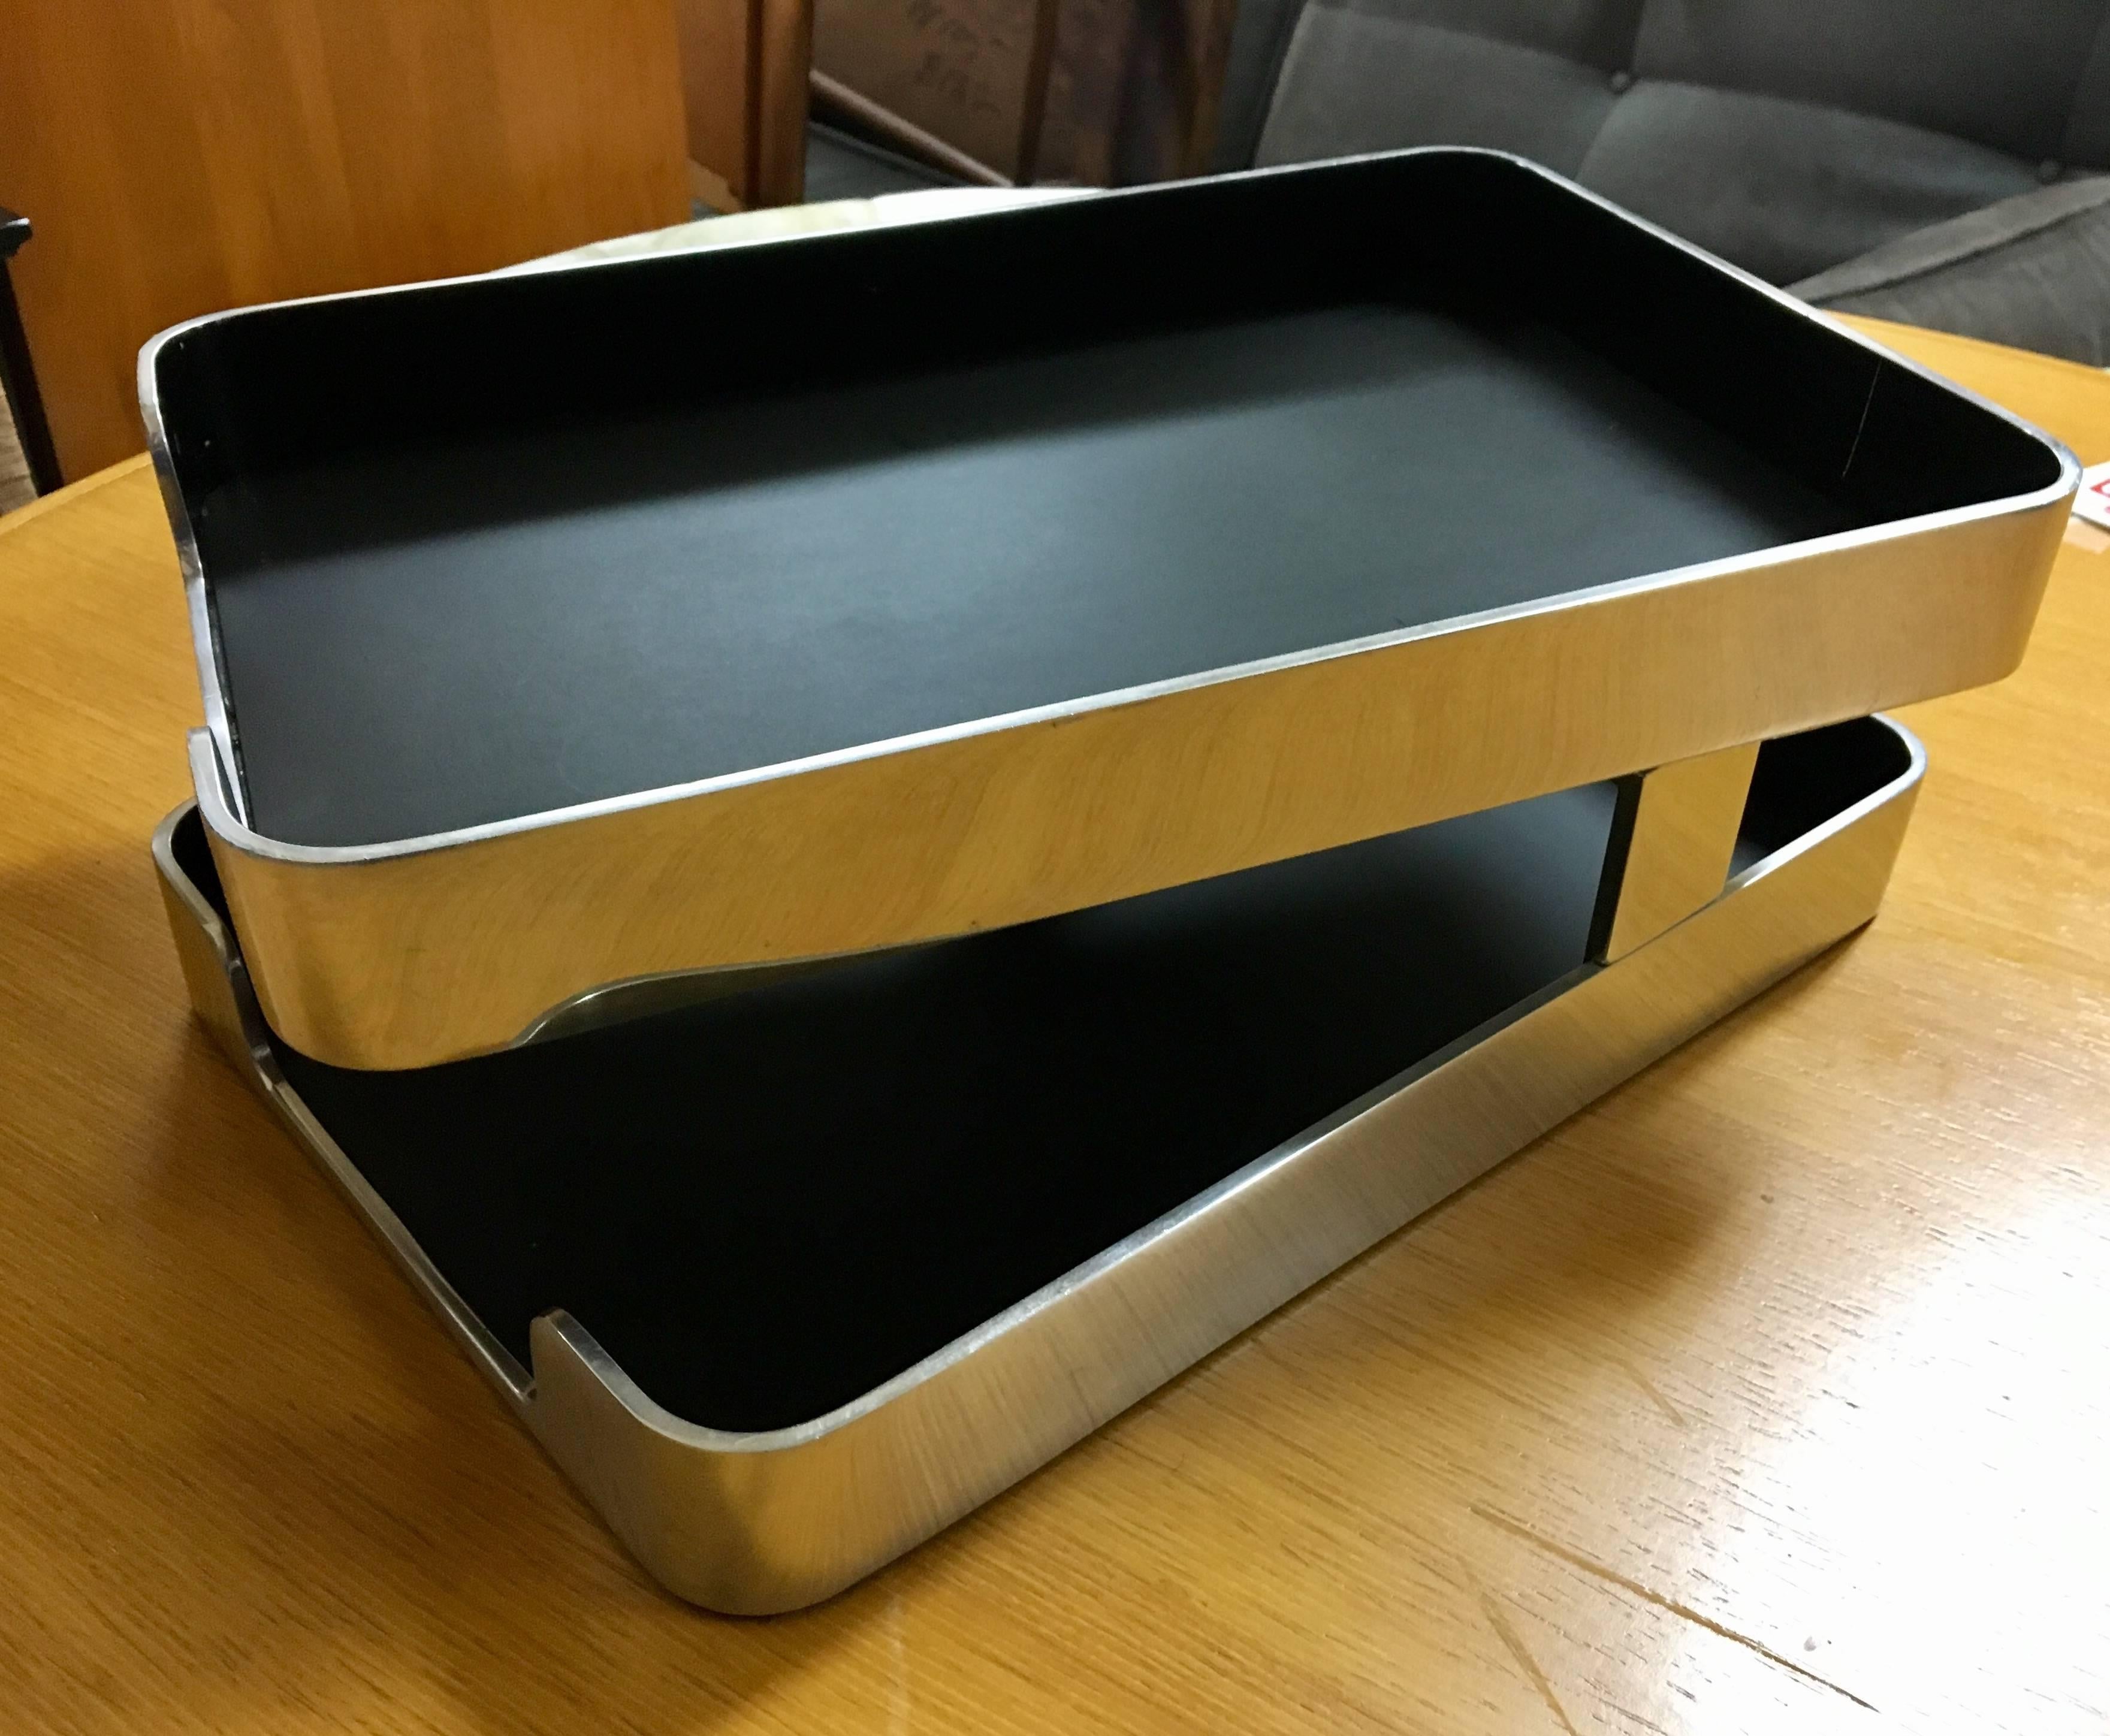 Double letter tray in polished aluminum finish with black enamel lining from the Radius One Metal Collection designed by William Sklaroff for Smith Metal Arts/McDonald Products,USA circa 1970's.  The top tray swivels from side to side.  Very nice